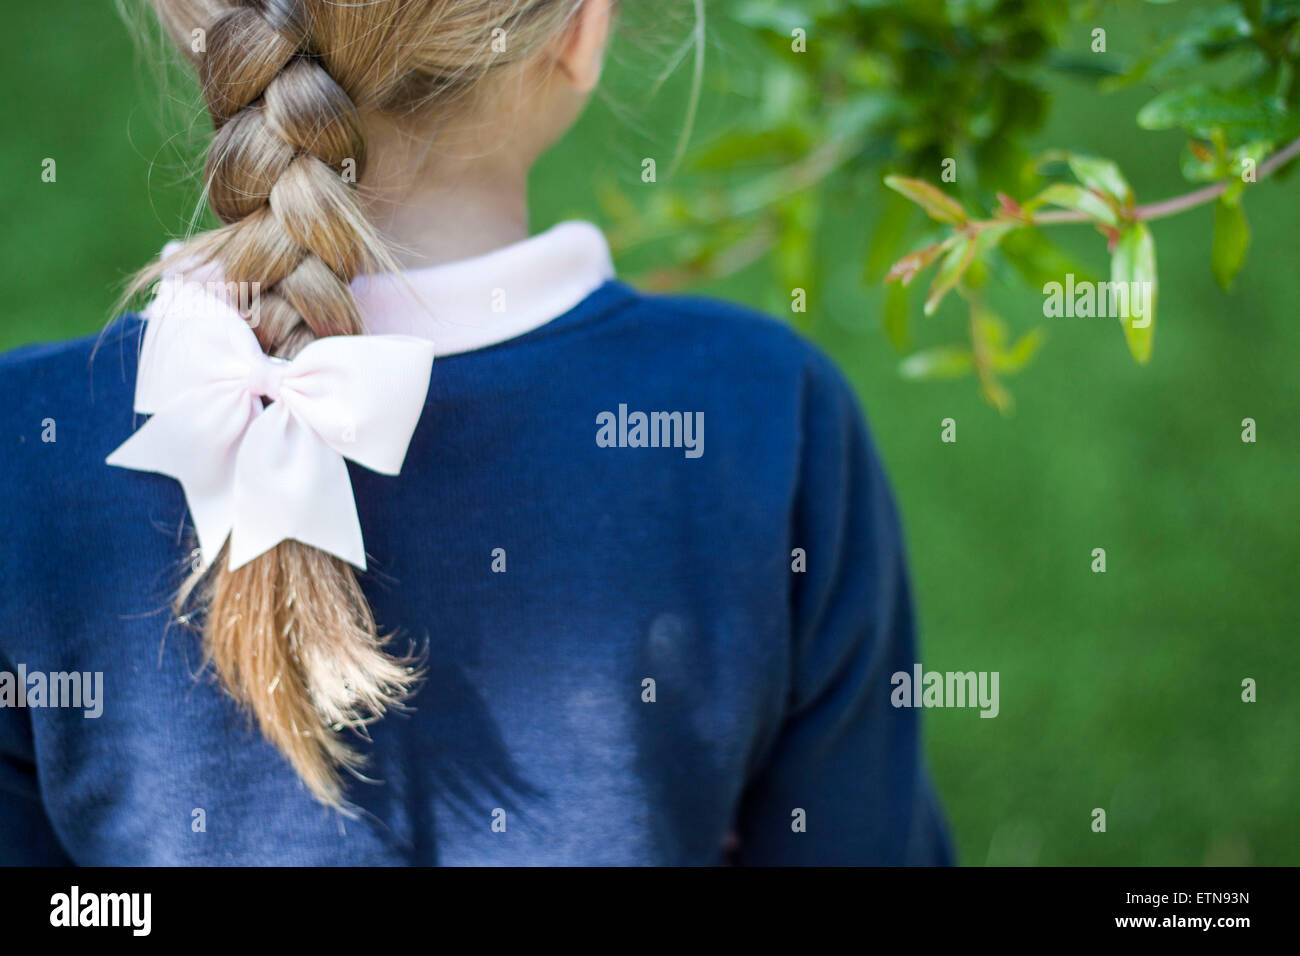 Rear view of a girl with braided hair Stock Photo